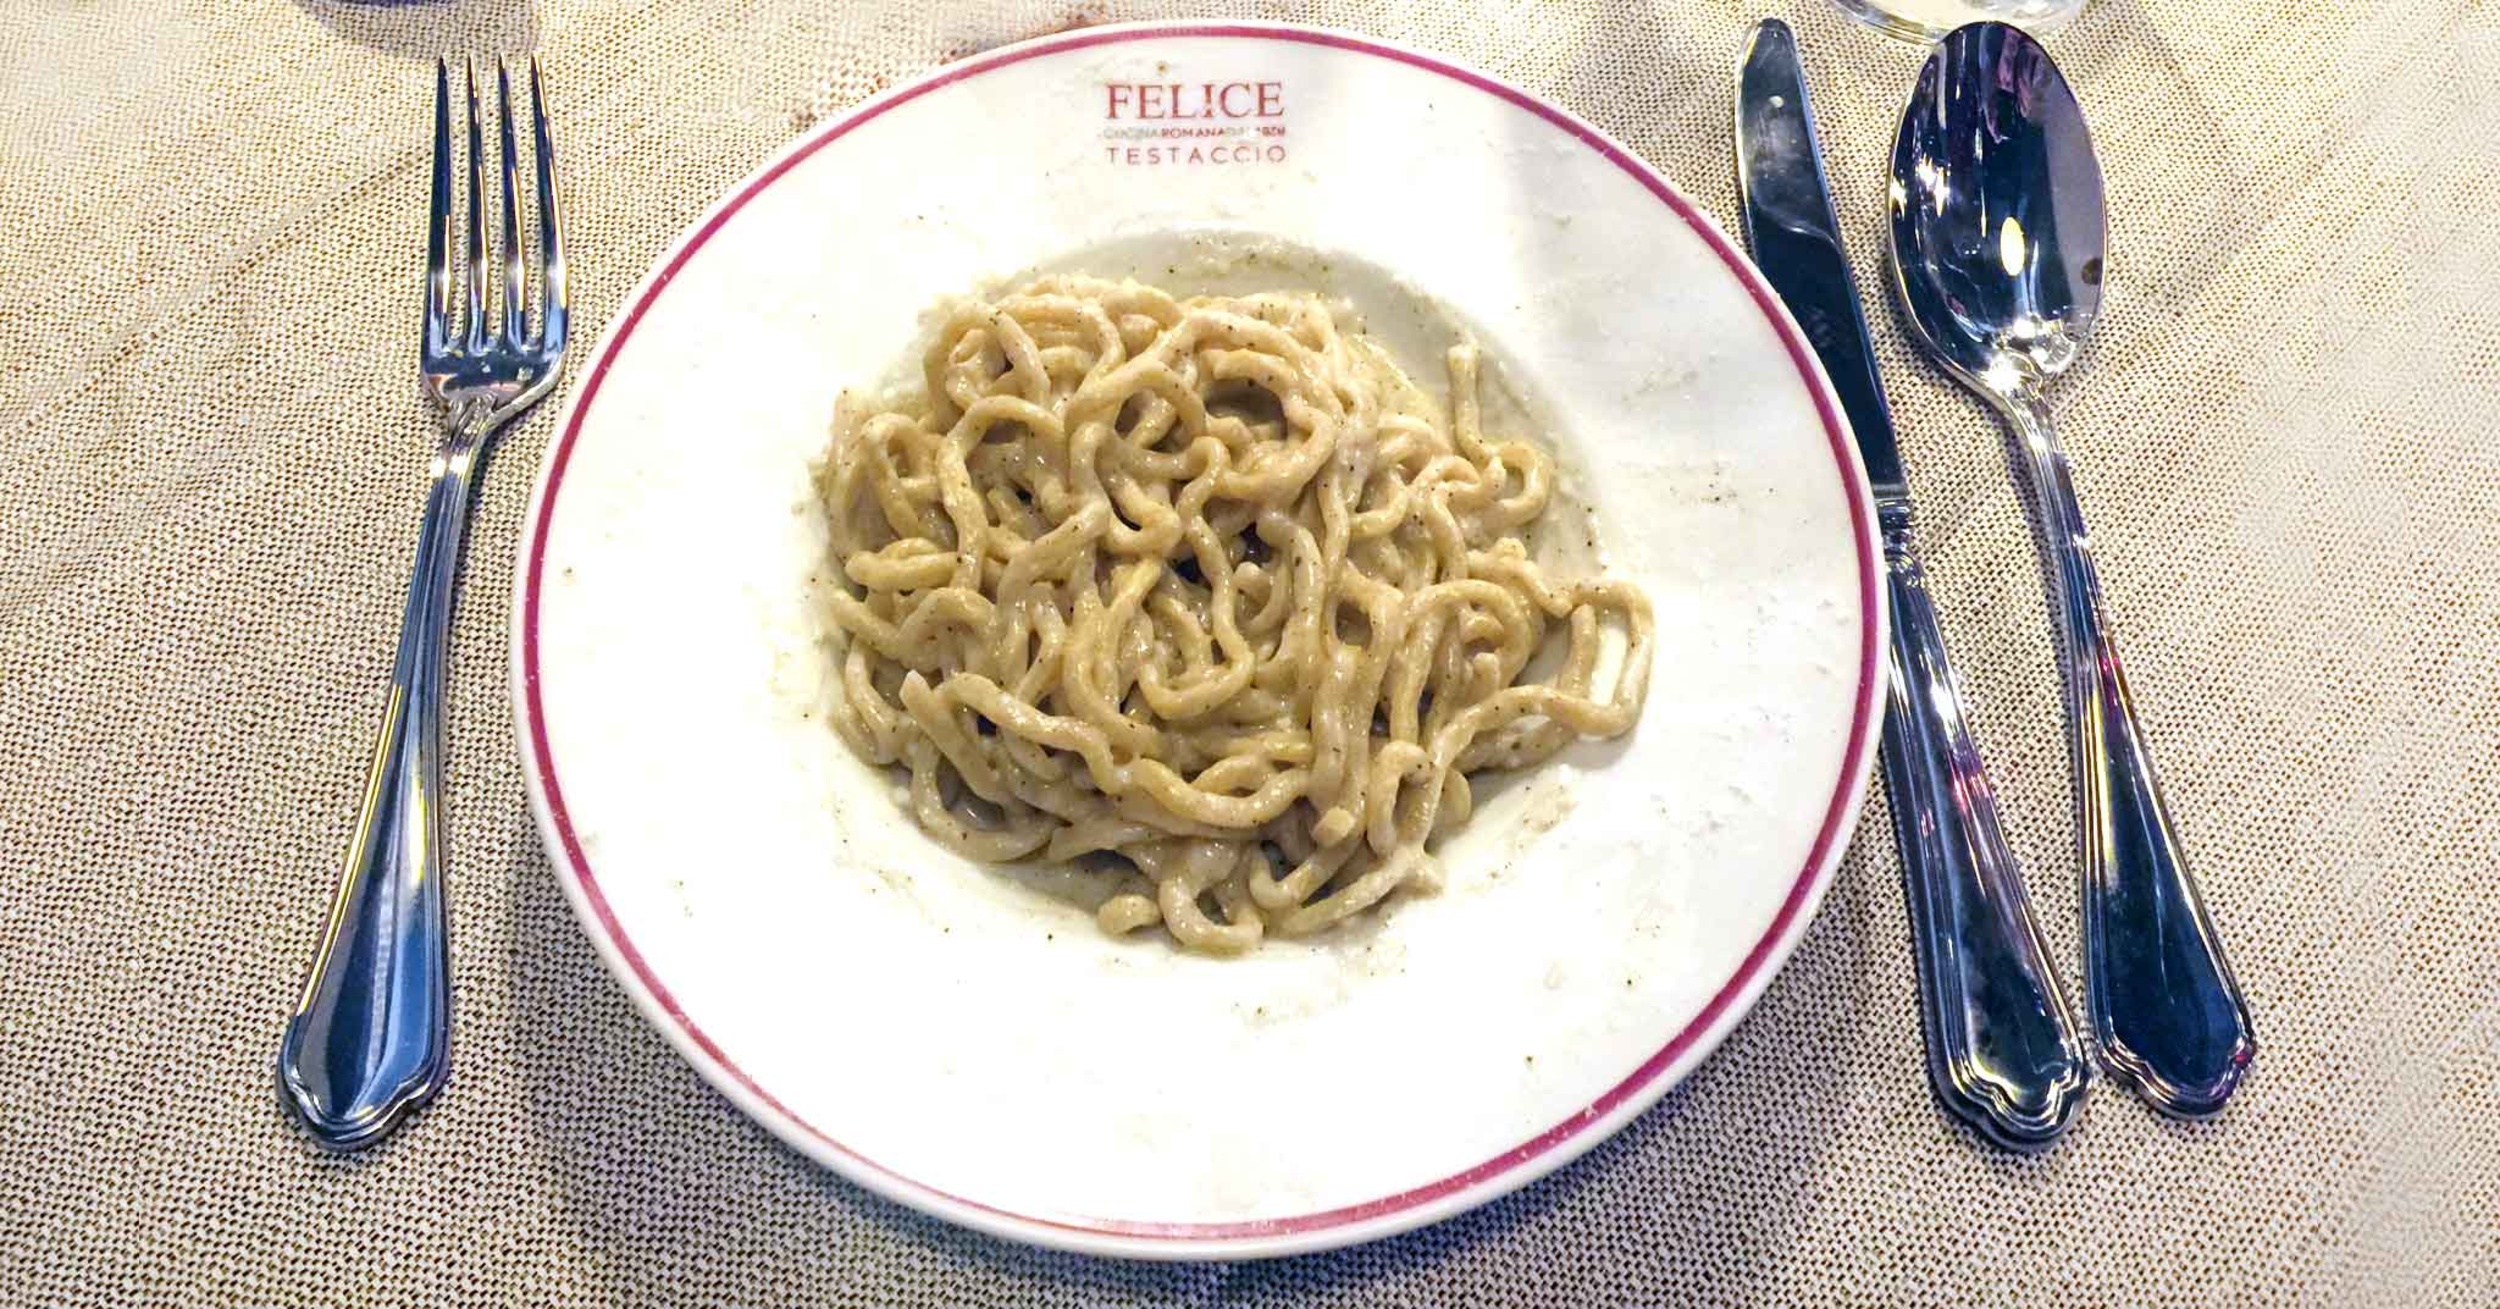 <p>Did we mention Rome might have invented cacio e pepe? Whether the stories are true or not, the city's restaurants all serve their own version of this signature dish. The best place to order one of these plates is at Felice a Testaccio, which prepares the pasta in front of you and has graciously located itself outside of town. You're going to need a long walk after this one. </p><p>You may also like: <a href='https://www.yardbarker.com/lifestyle/articles/here_are_the_22_best_sources_of_fiber_010224/s1__36730016'>Here are the 22 best sources of fiber</a></p>